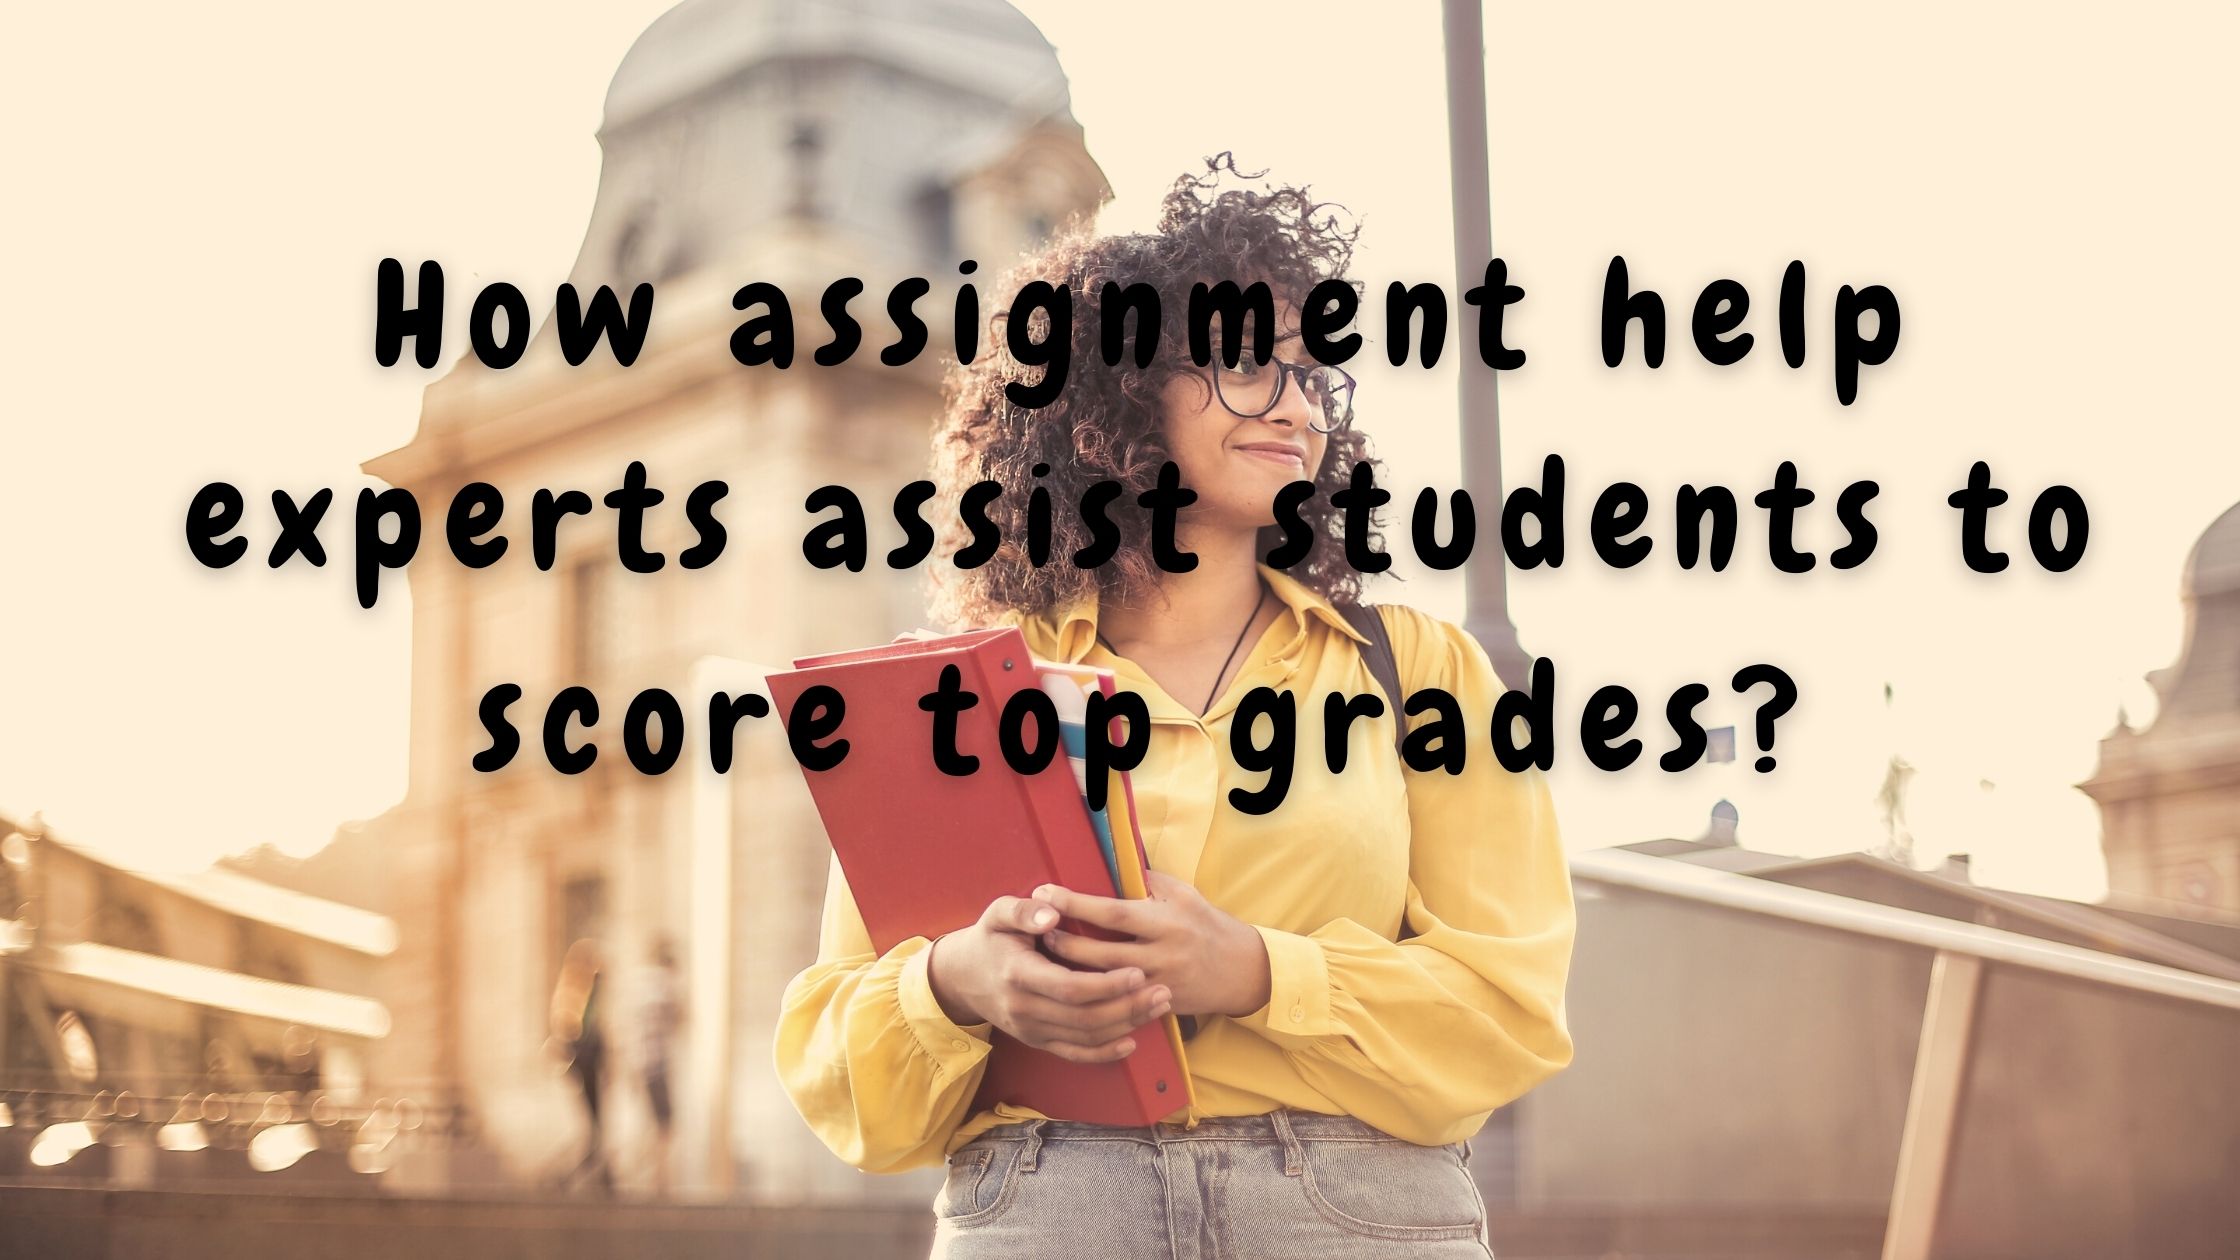 How assignment help experts assist students to score top grades?